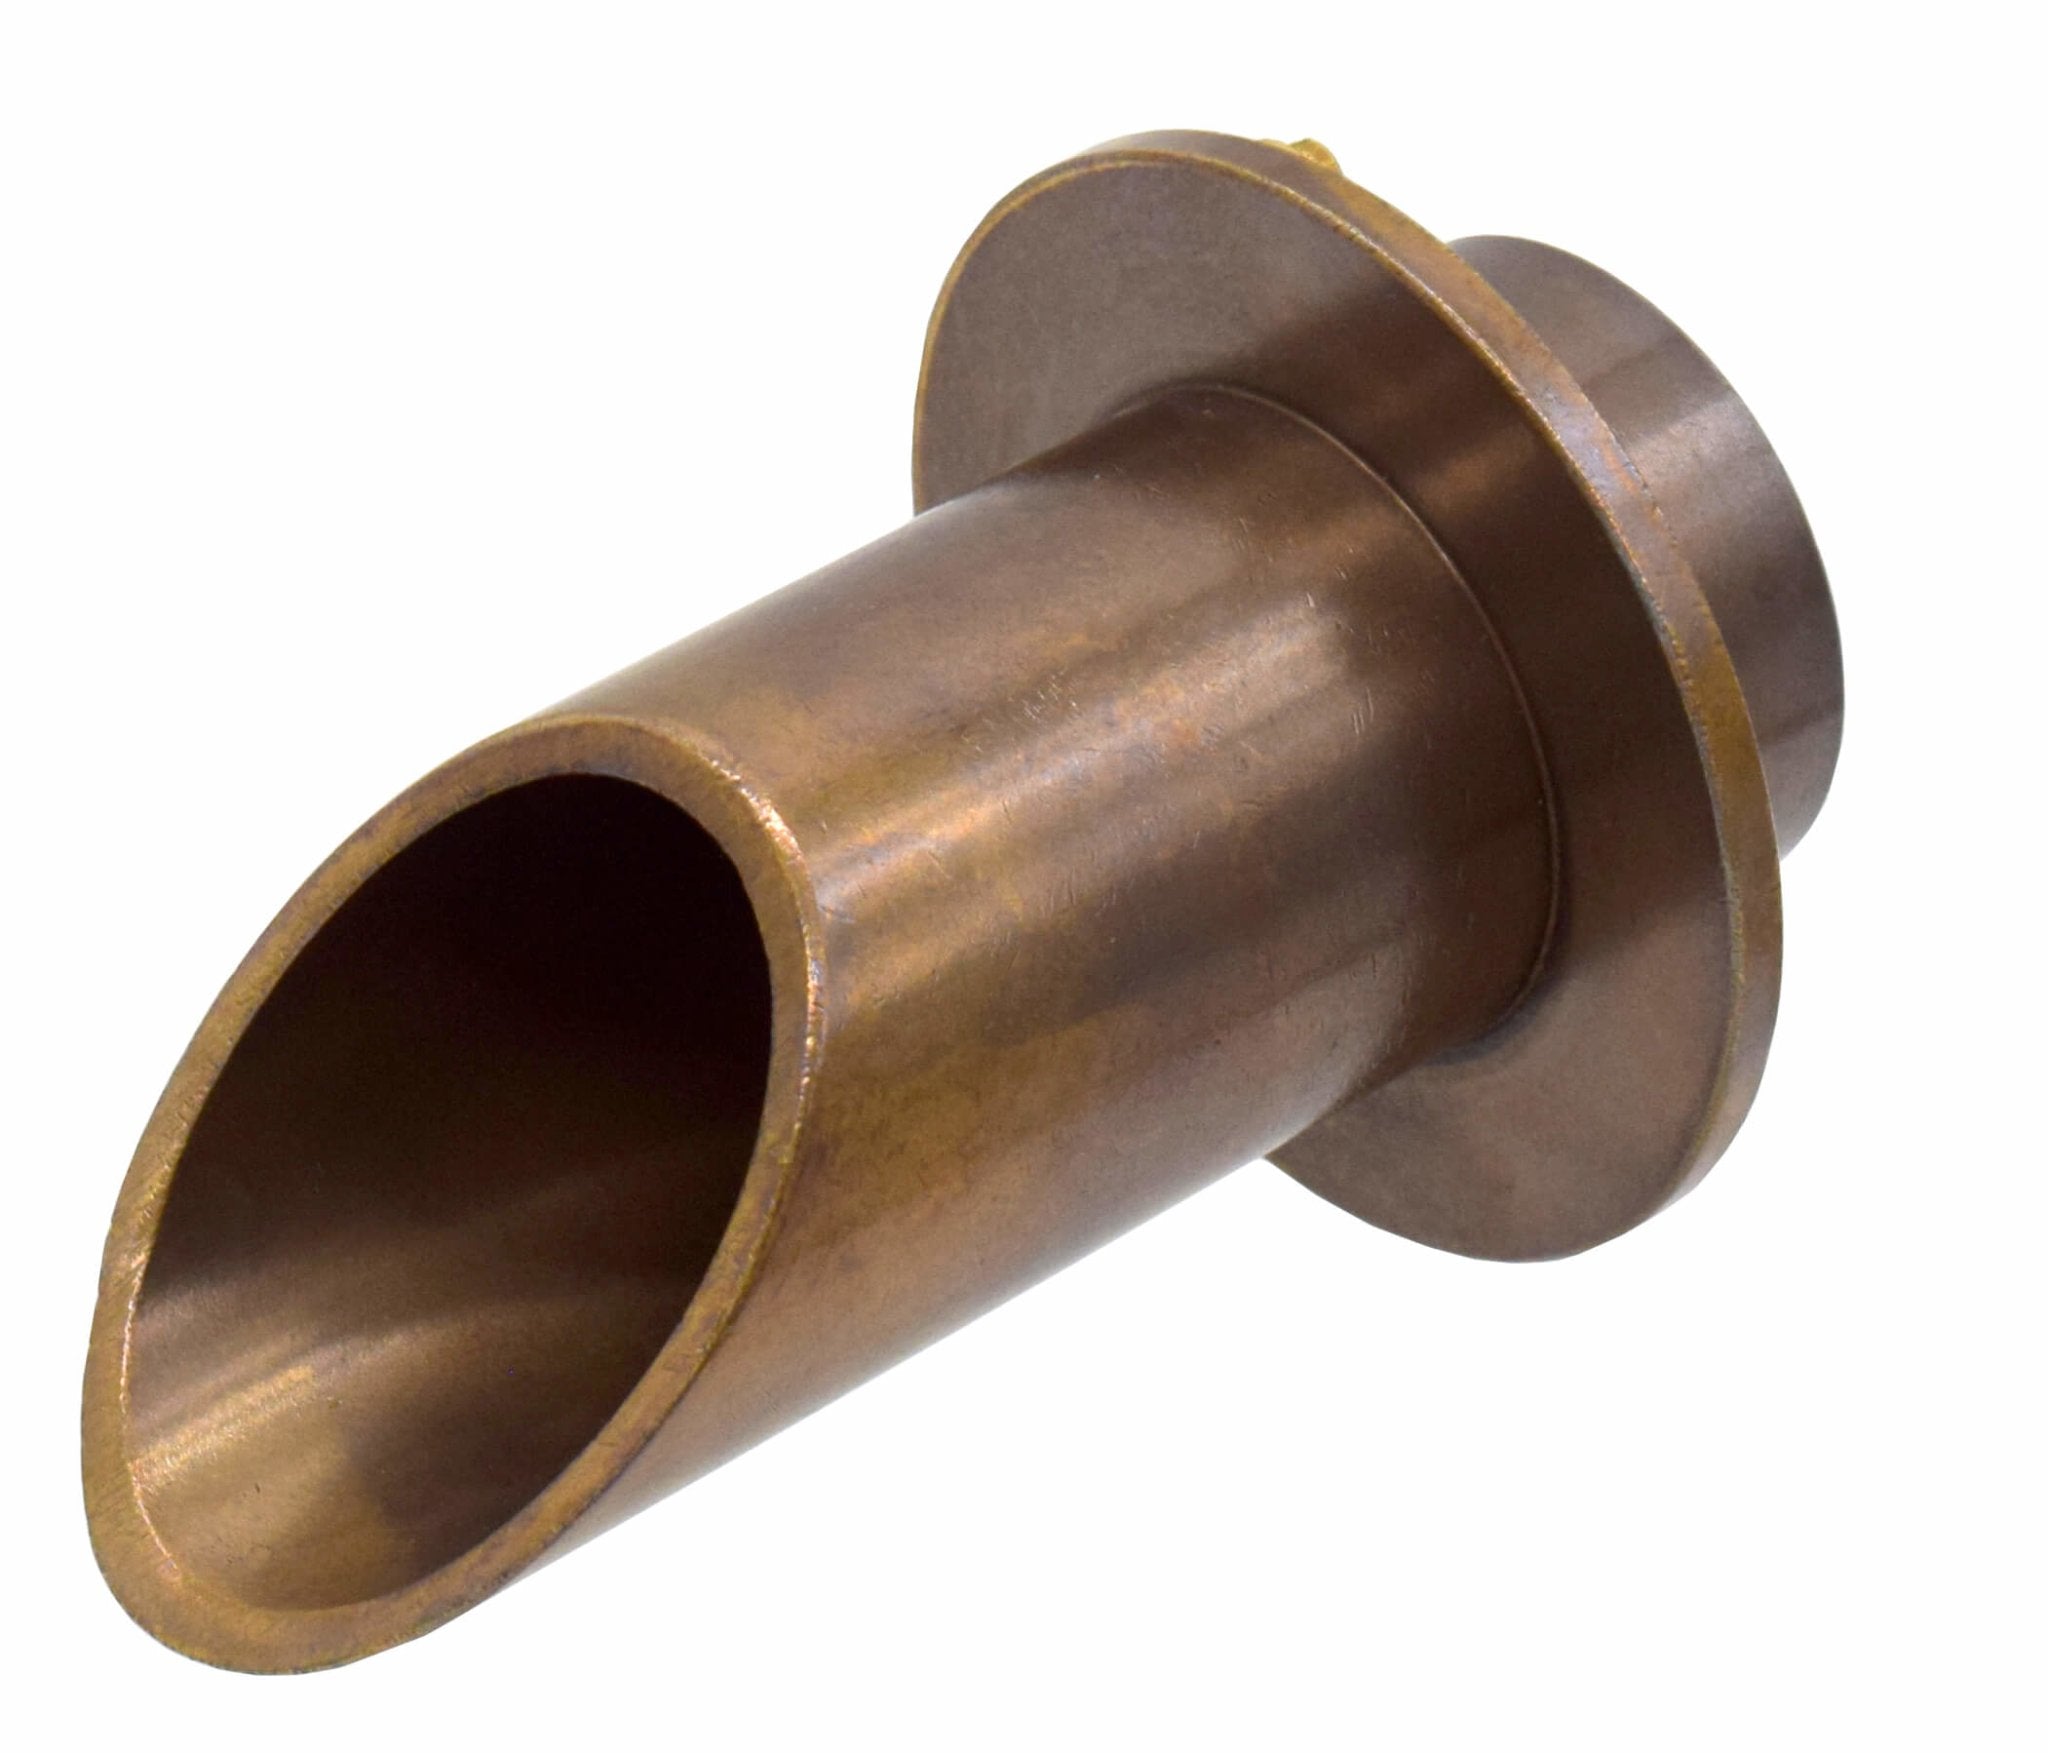 EasyPro Fountain Basalt Vianti Falls Brass 2" Round Scupper with Round Wall plate Vianti Falls Brass 2" Round Scupper with Round Wall plate